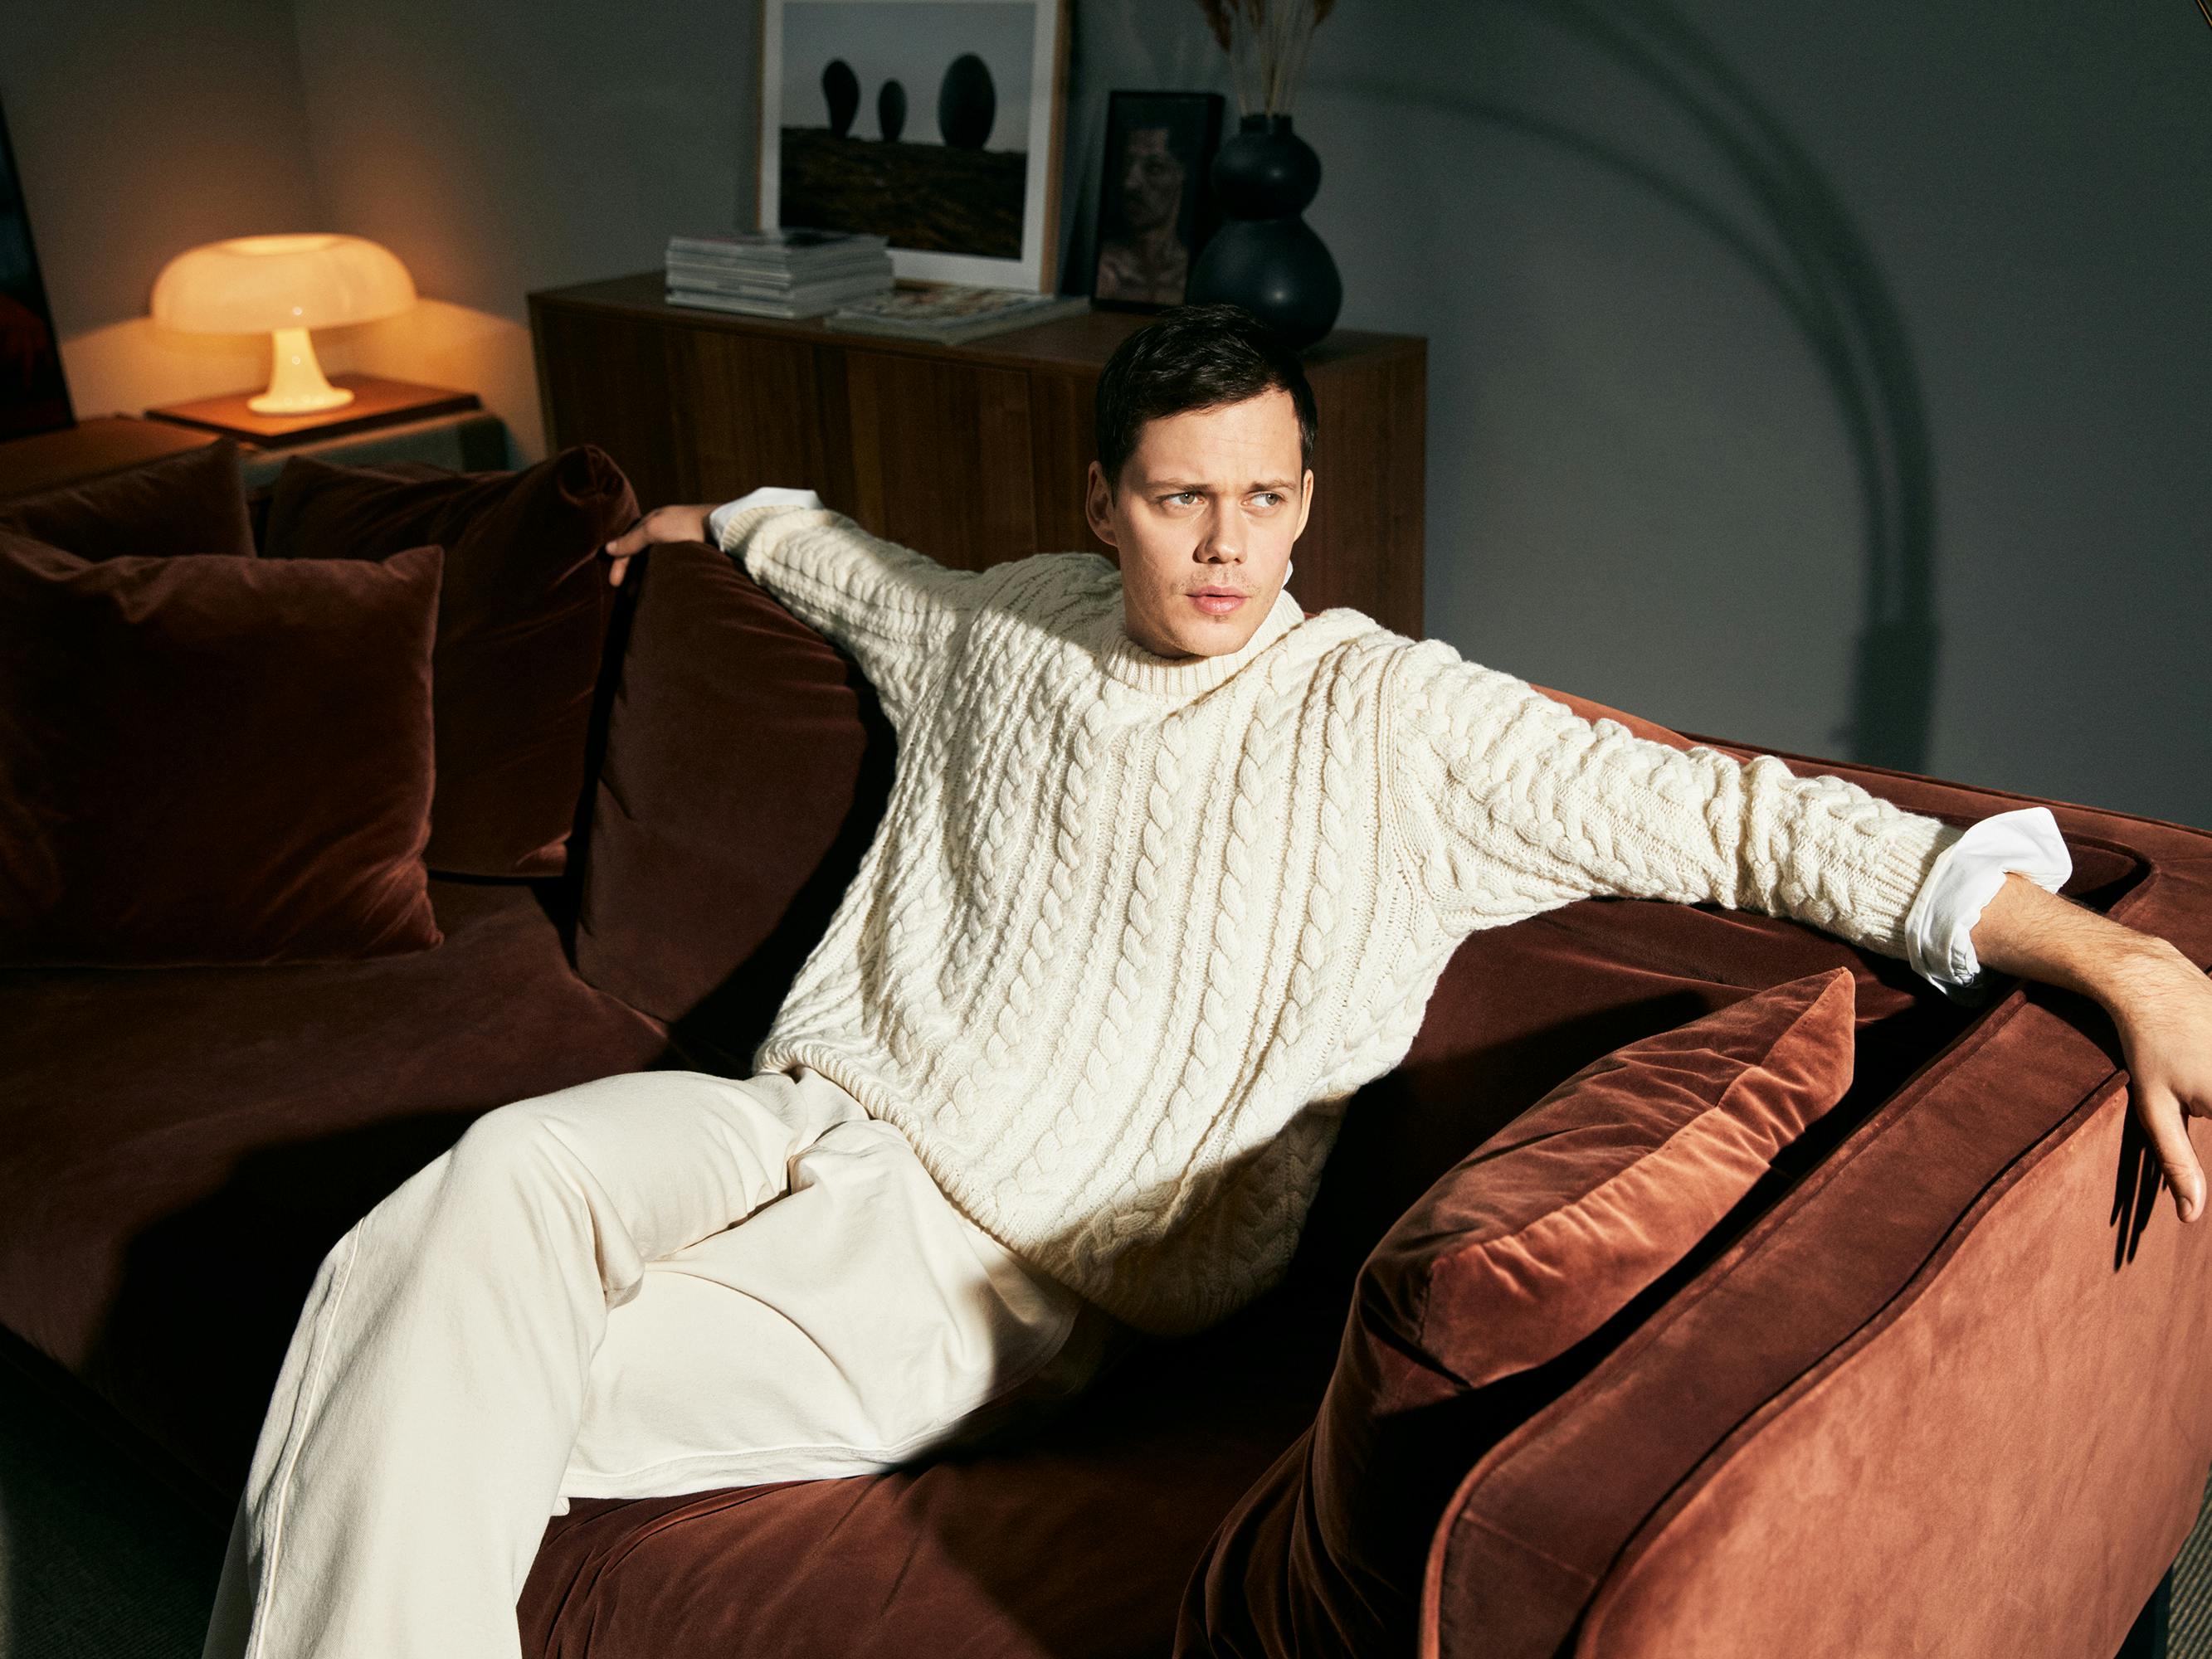 Bill Skarsgård wears a cream colored outfit and stretches out on a brown velvet couch. 